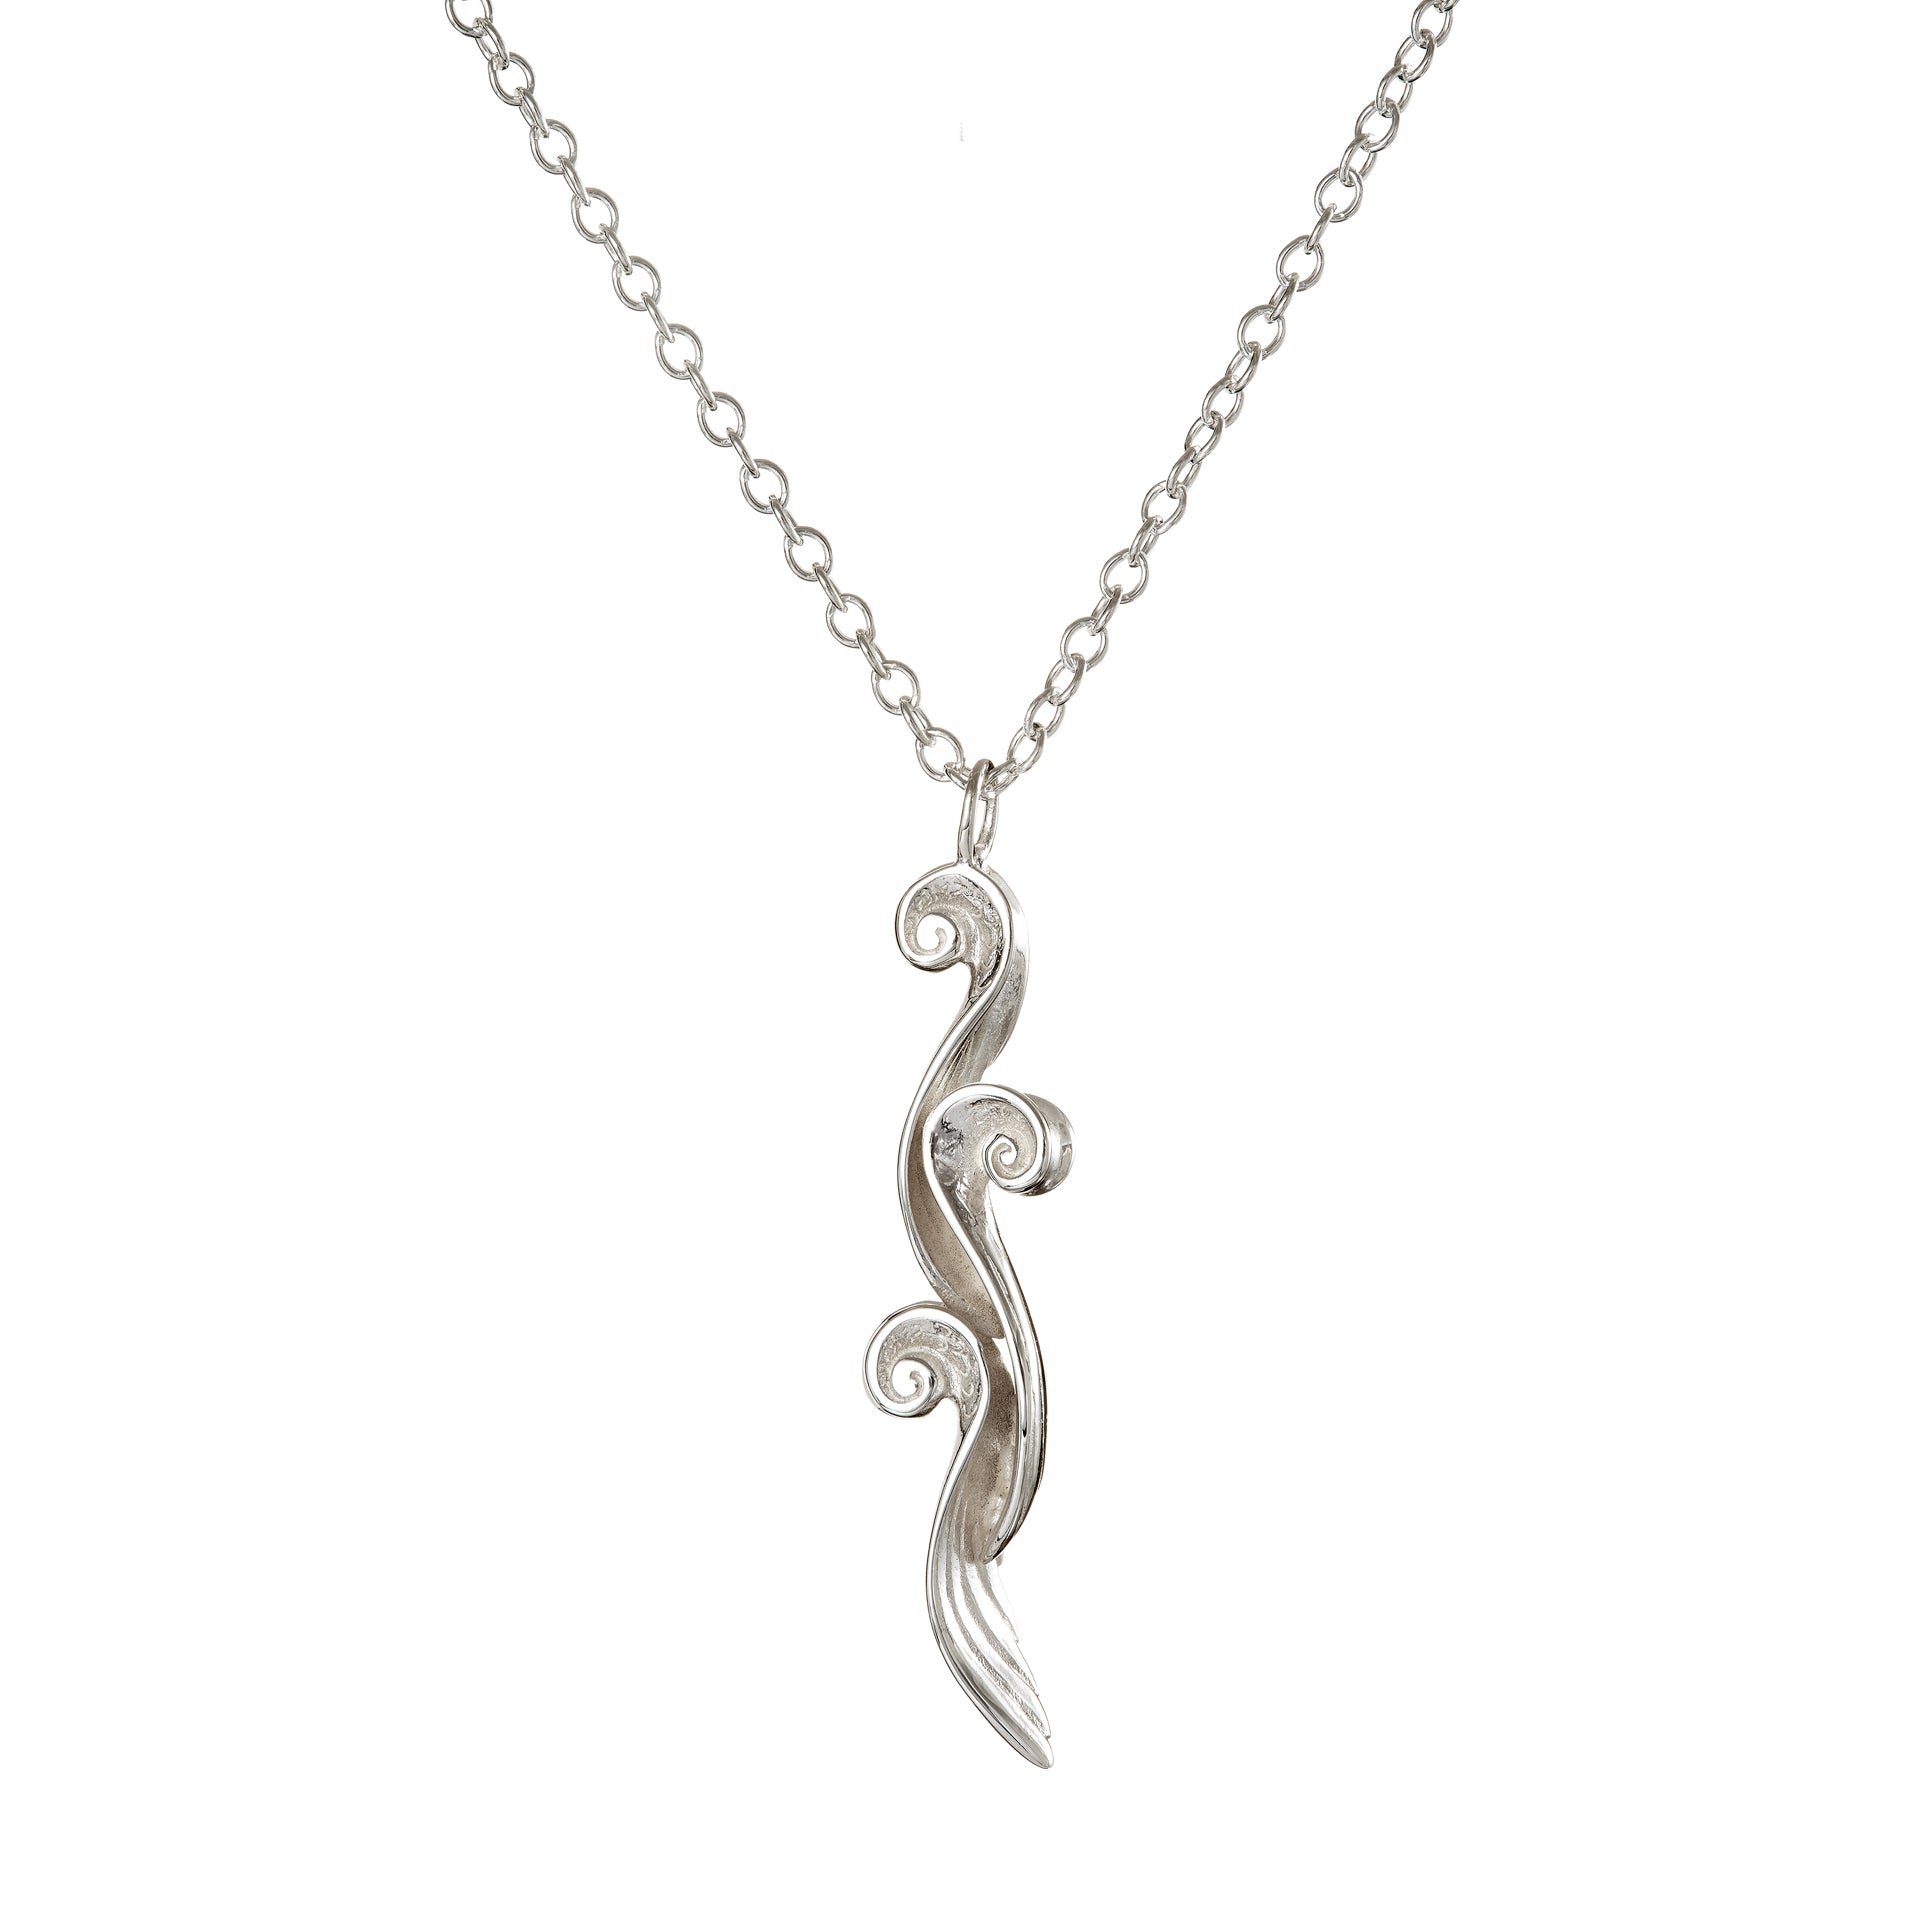 Sterling silver Three Spiral angel wings pendant, made in Ireland. Part of Elena Brennan's My Angel jewellery collection.